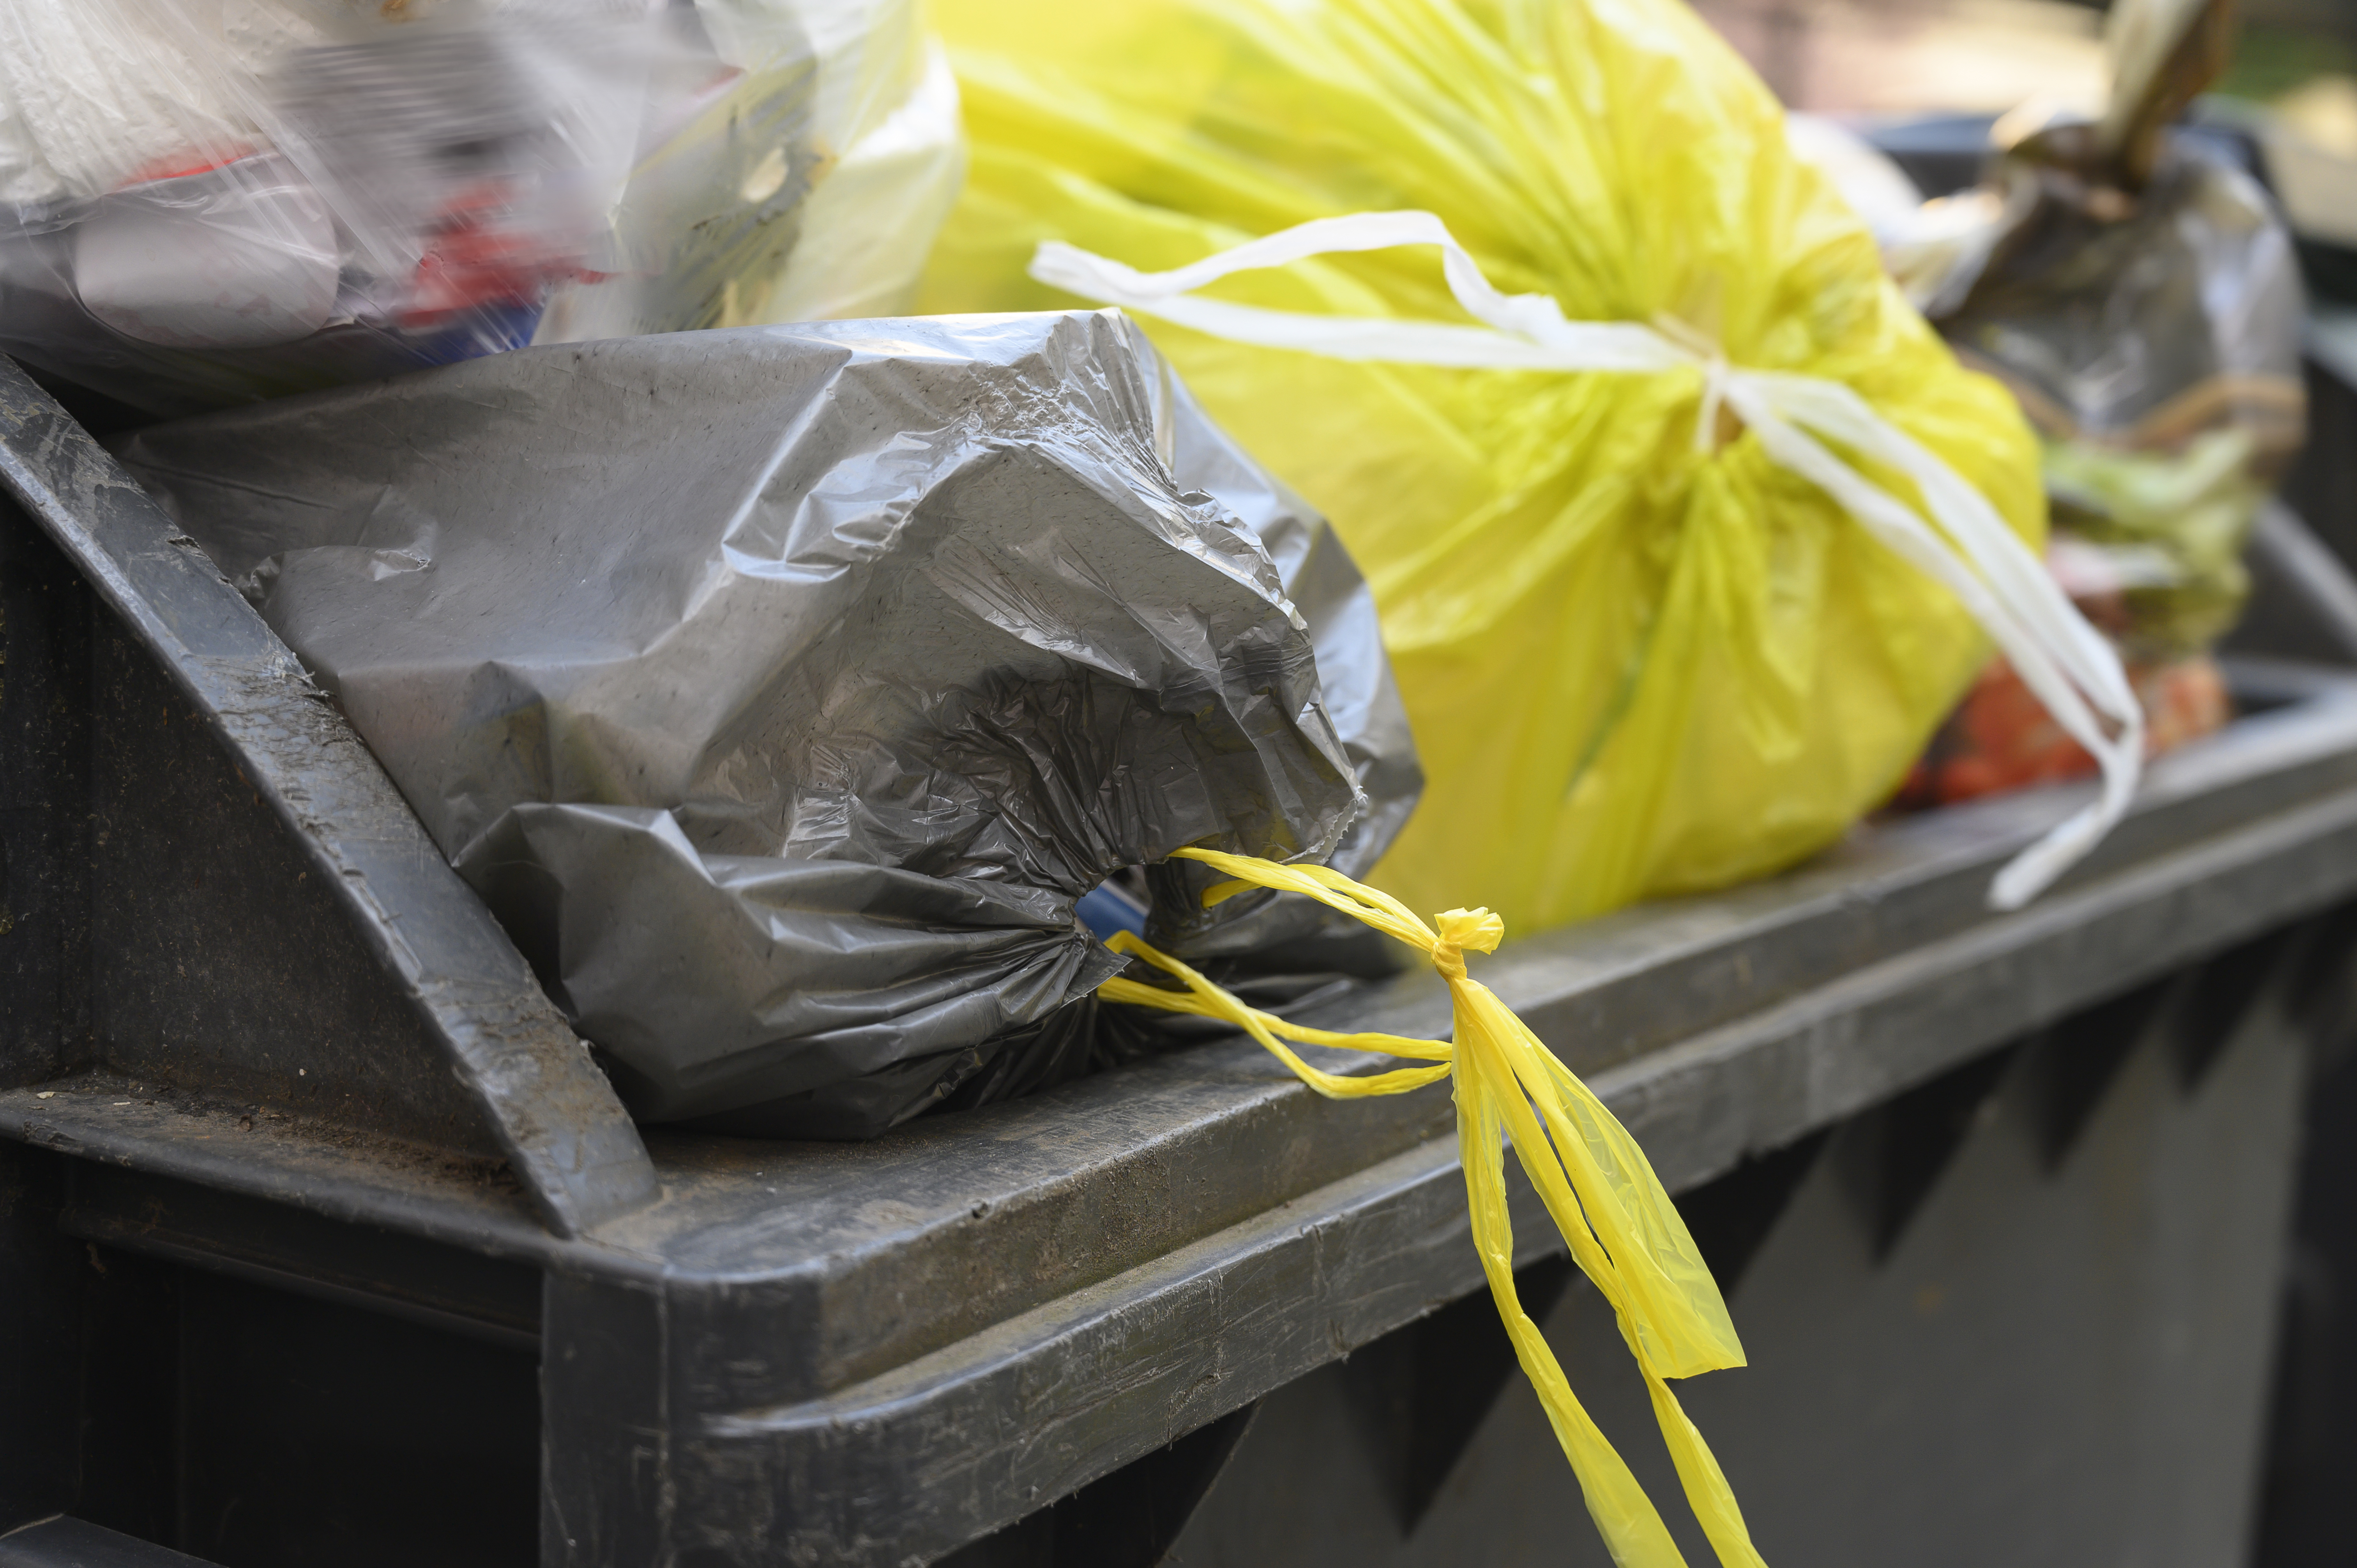 Wellington County residents to pay more for their garbage collection